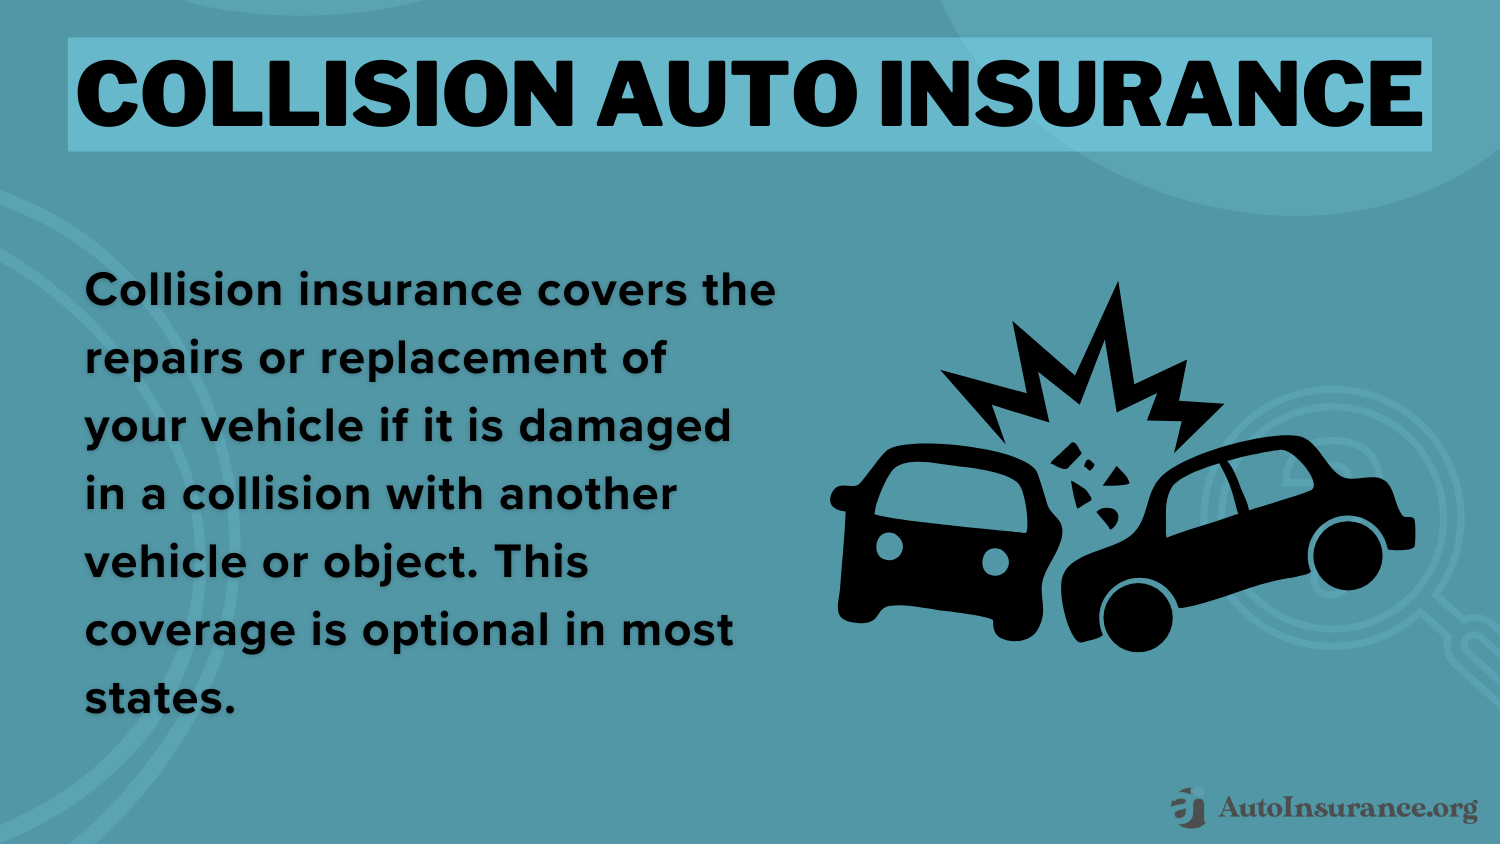 Government Assistance Programs for Low-Income Drivers: Collision Auto Insurance Definition Card